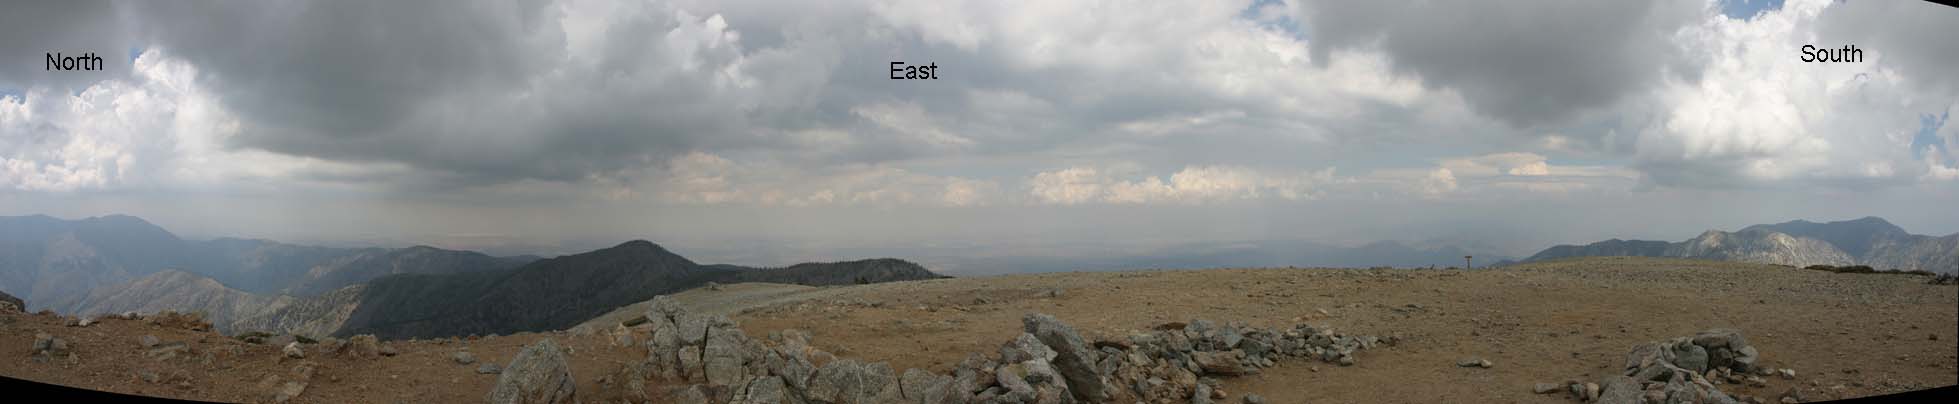 July 31, 2005: Summit of Mount Baldy (aka Mount San Antonio), North (left) to South (right). Facing East